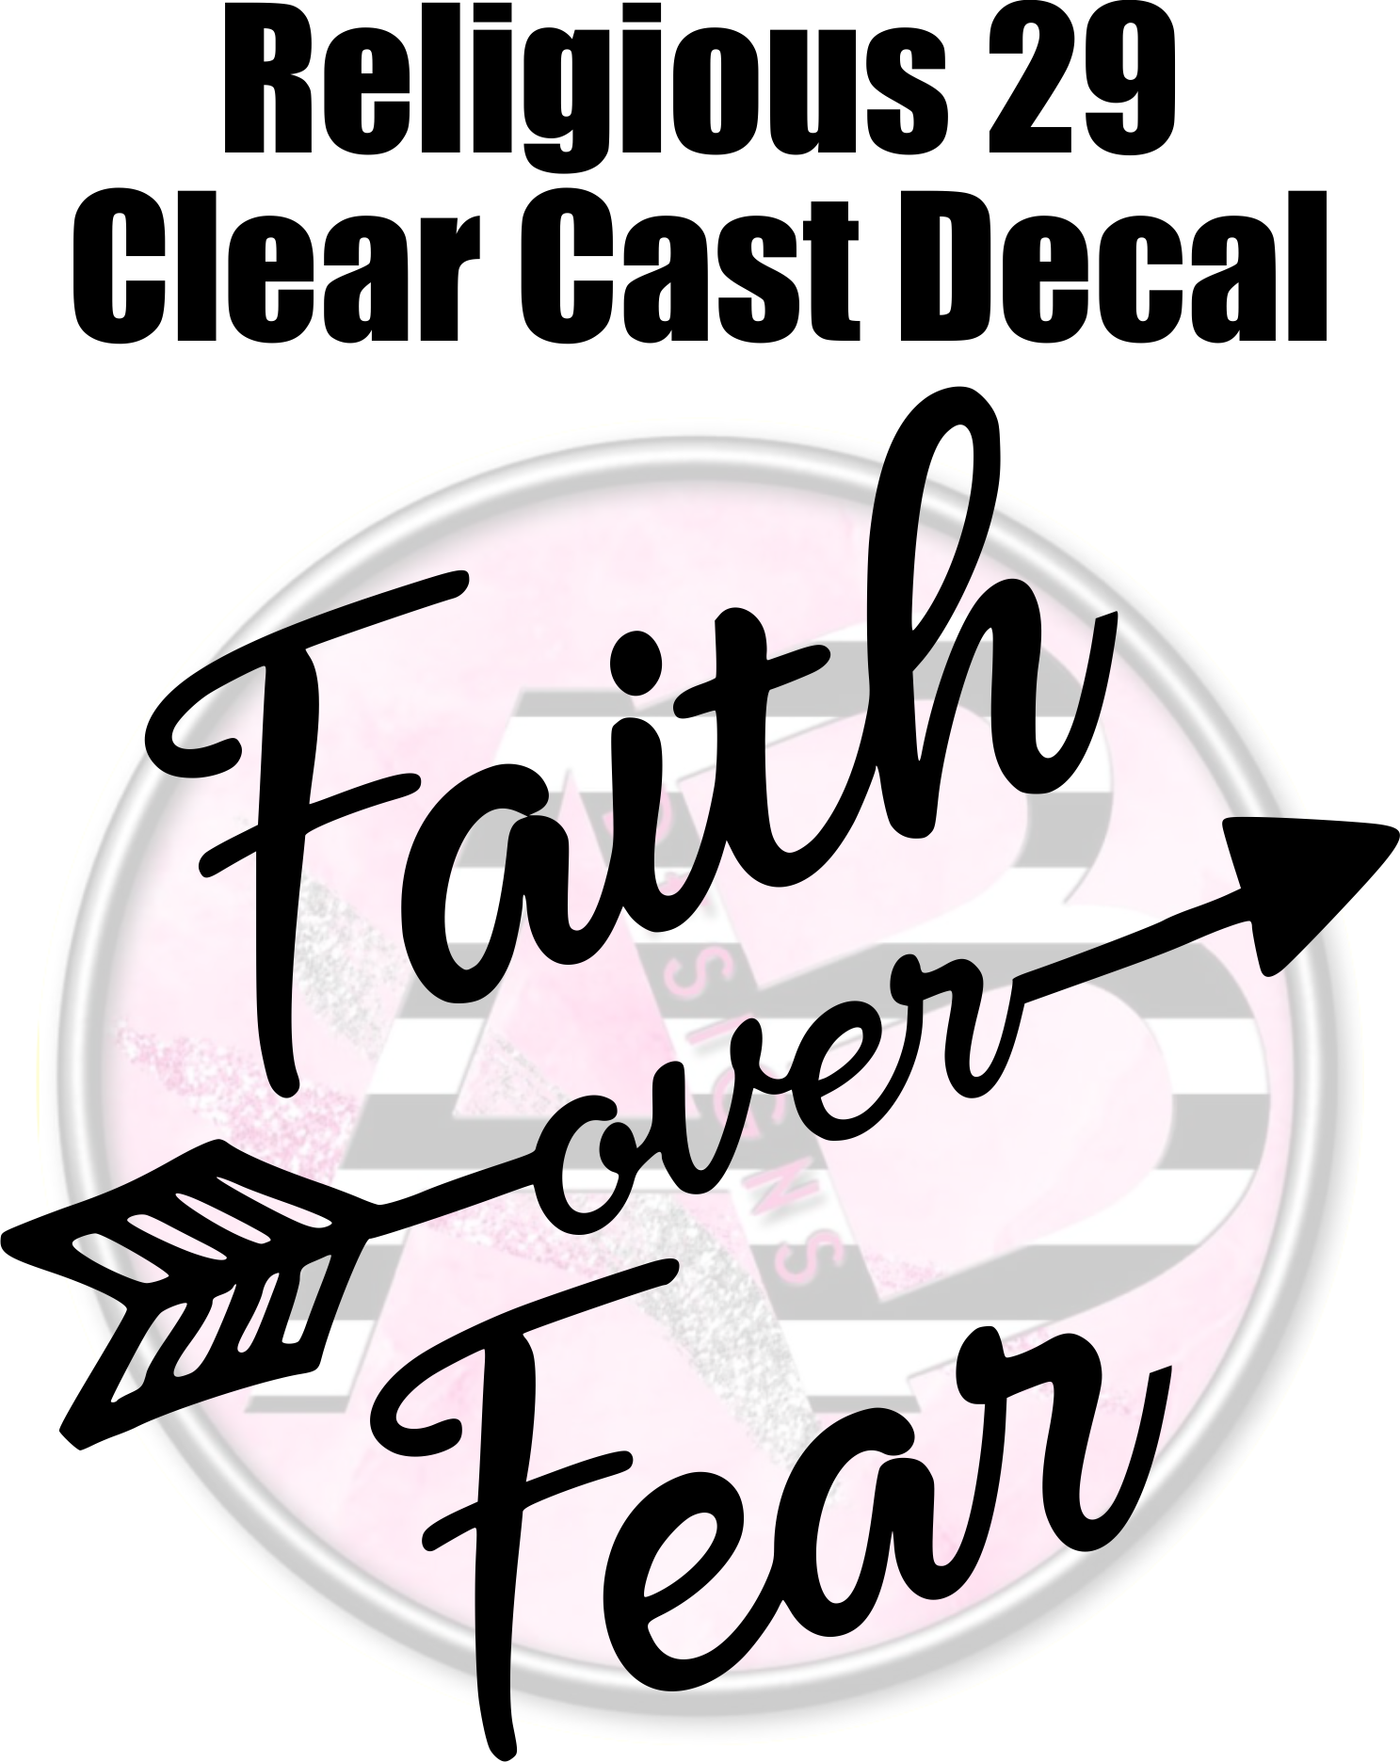 Religious 29 - Clear Cast Decal